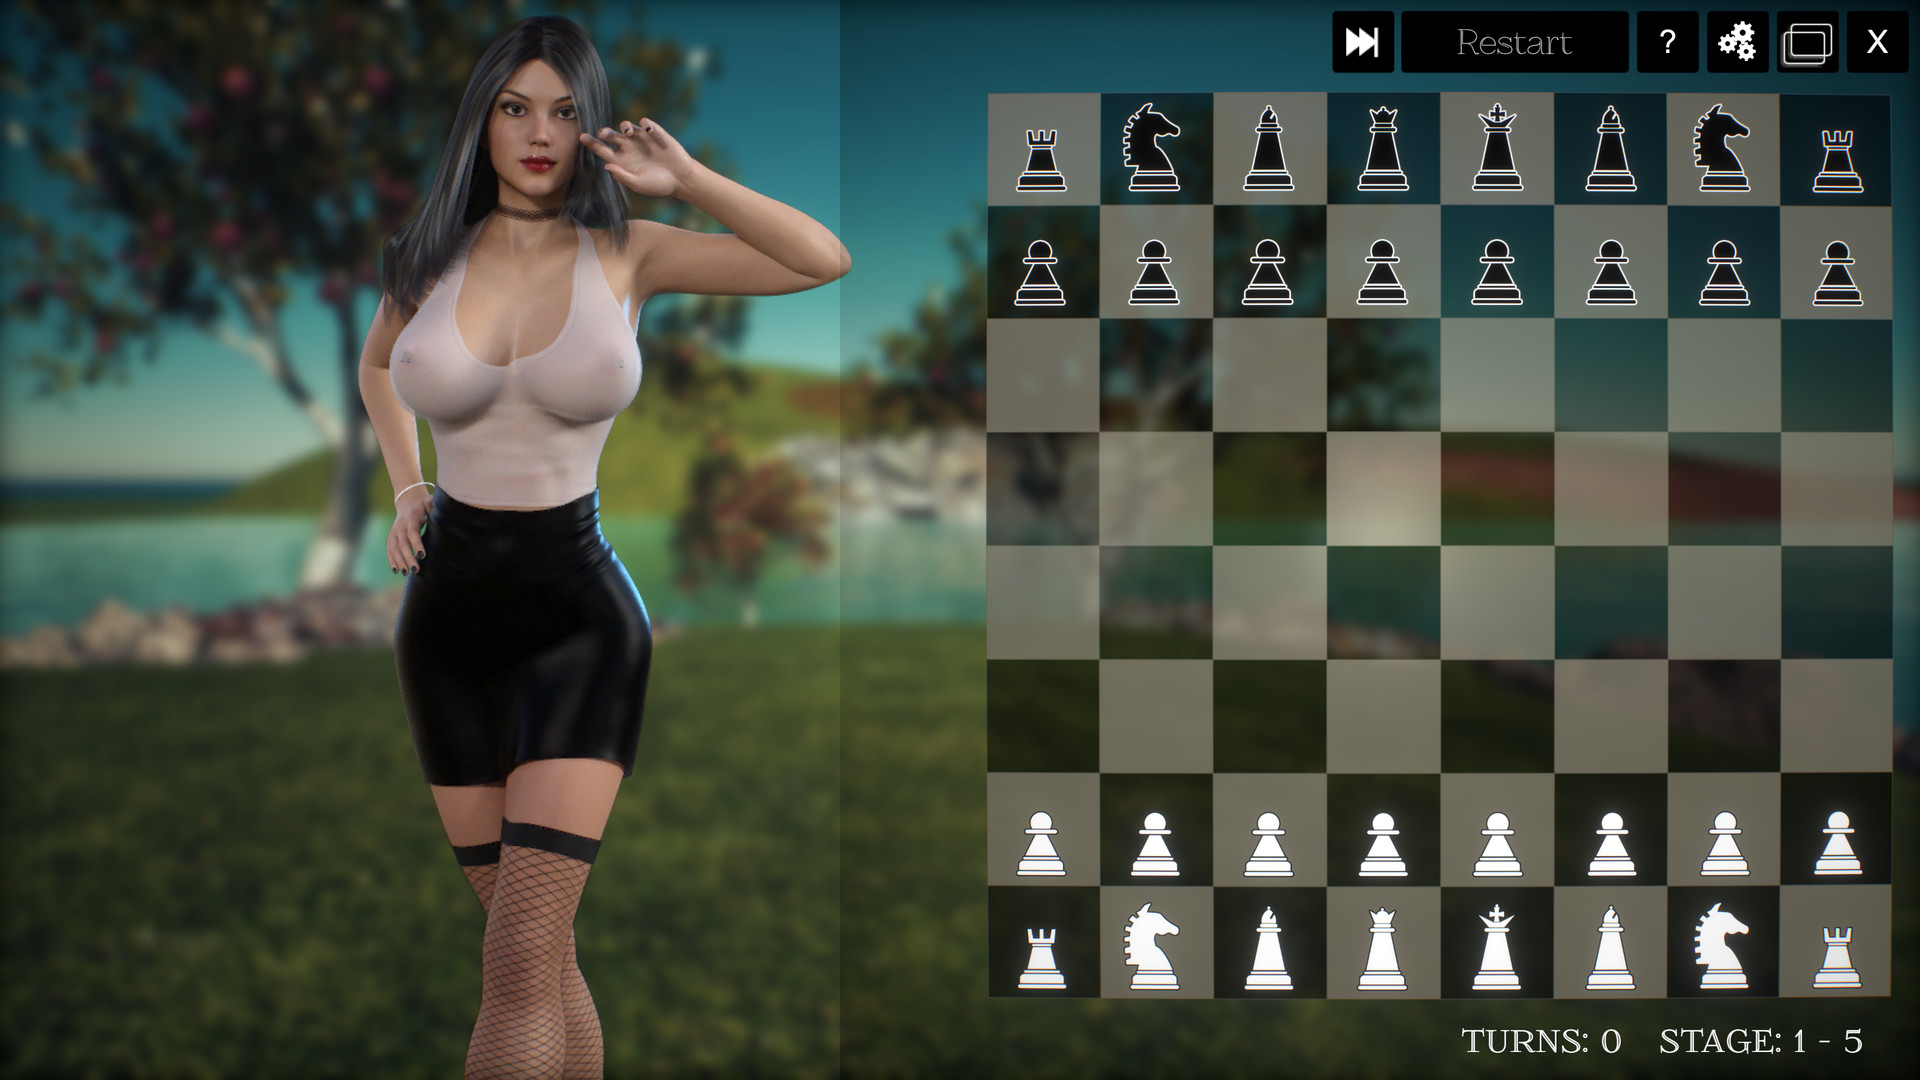 Chess Game Porn - 3D Hentai Chess [COMPLETED] - free game download, reviews, mega - xGames